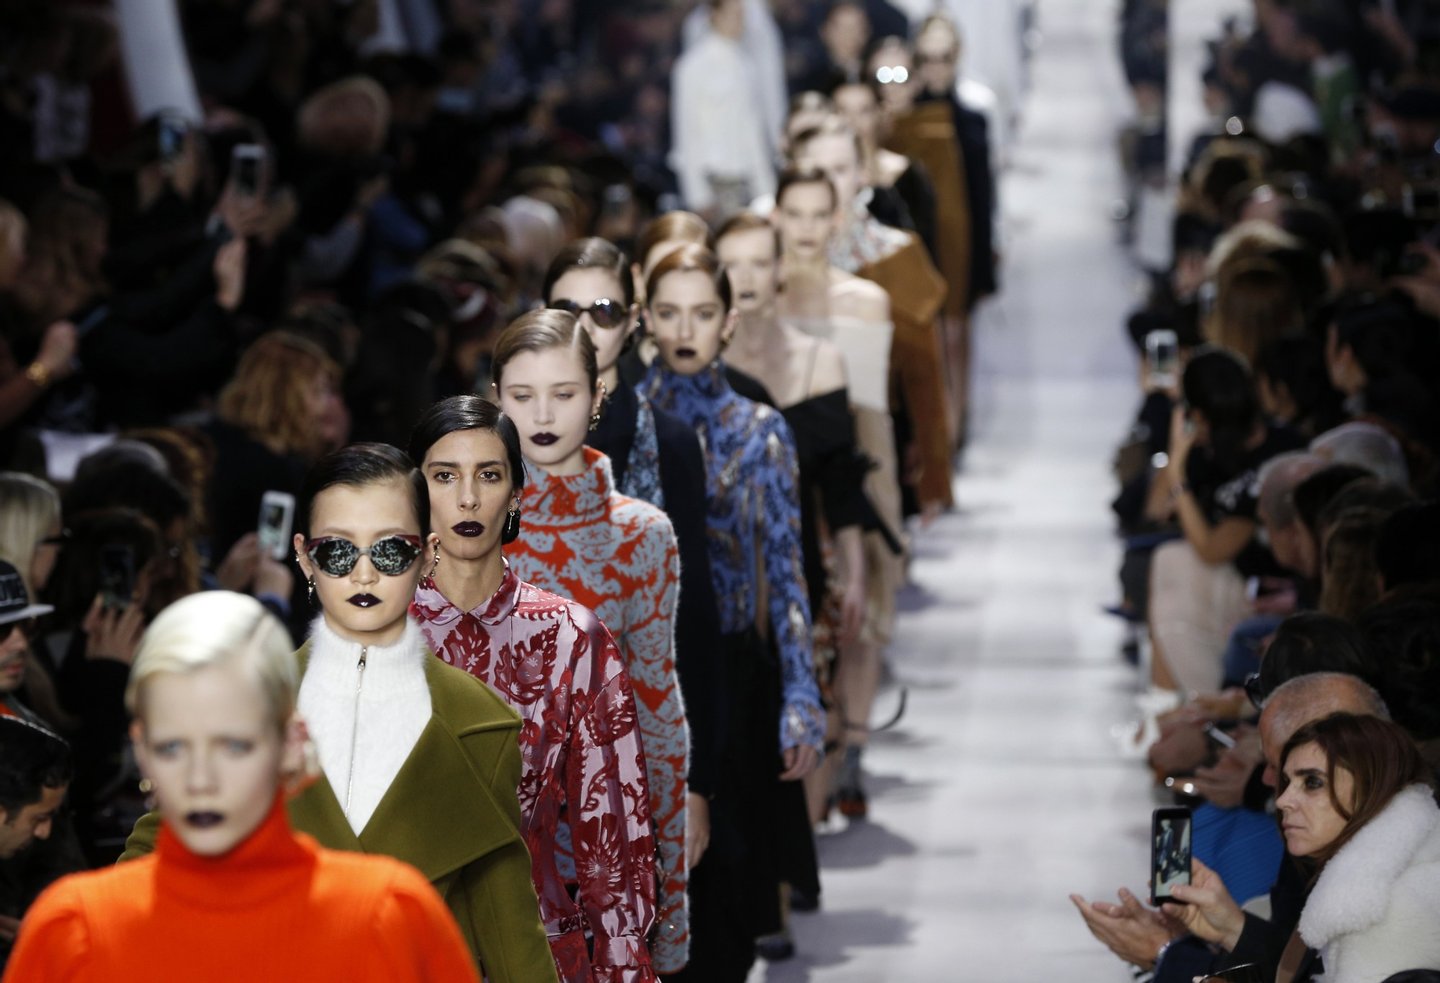 Models present creations for Christian Dior during the 2016-2017 fall/winter ready-to-wear collection fashion show on March 4, 2016 in Paris. AFP PHOTO / FRANCOIS GUILLOT / AFP / FranÃ§ois GUILLOT (Photo credit should read FRANCOIS GUILLOT/AFP/Getty Images)